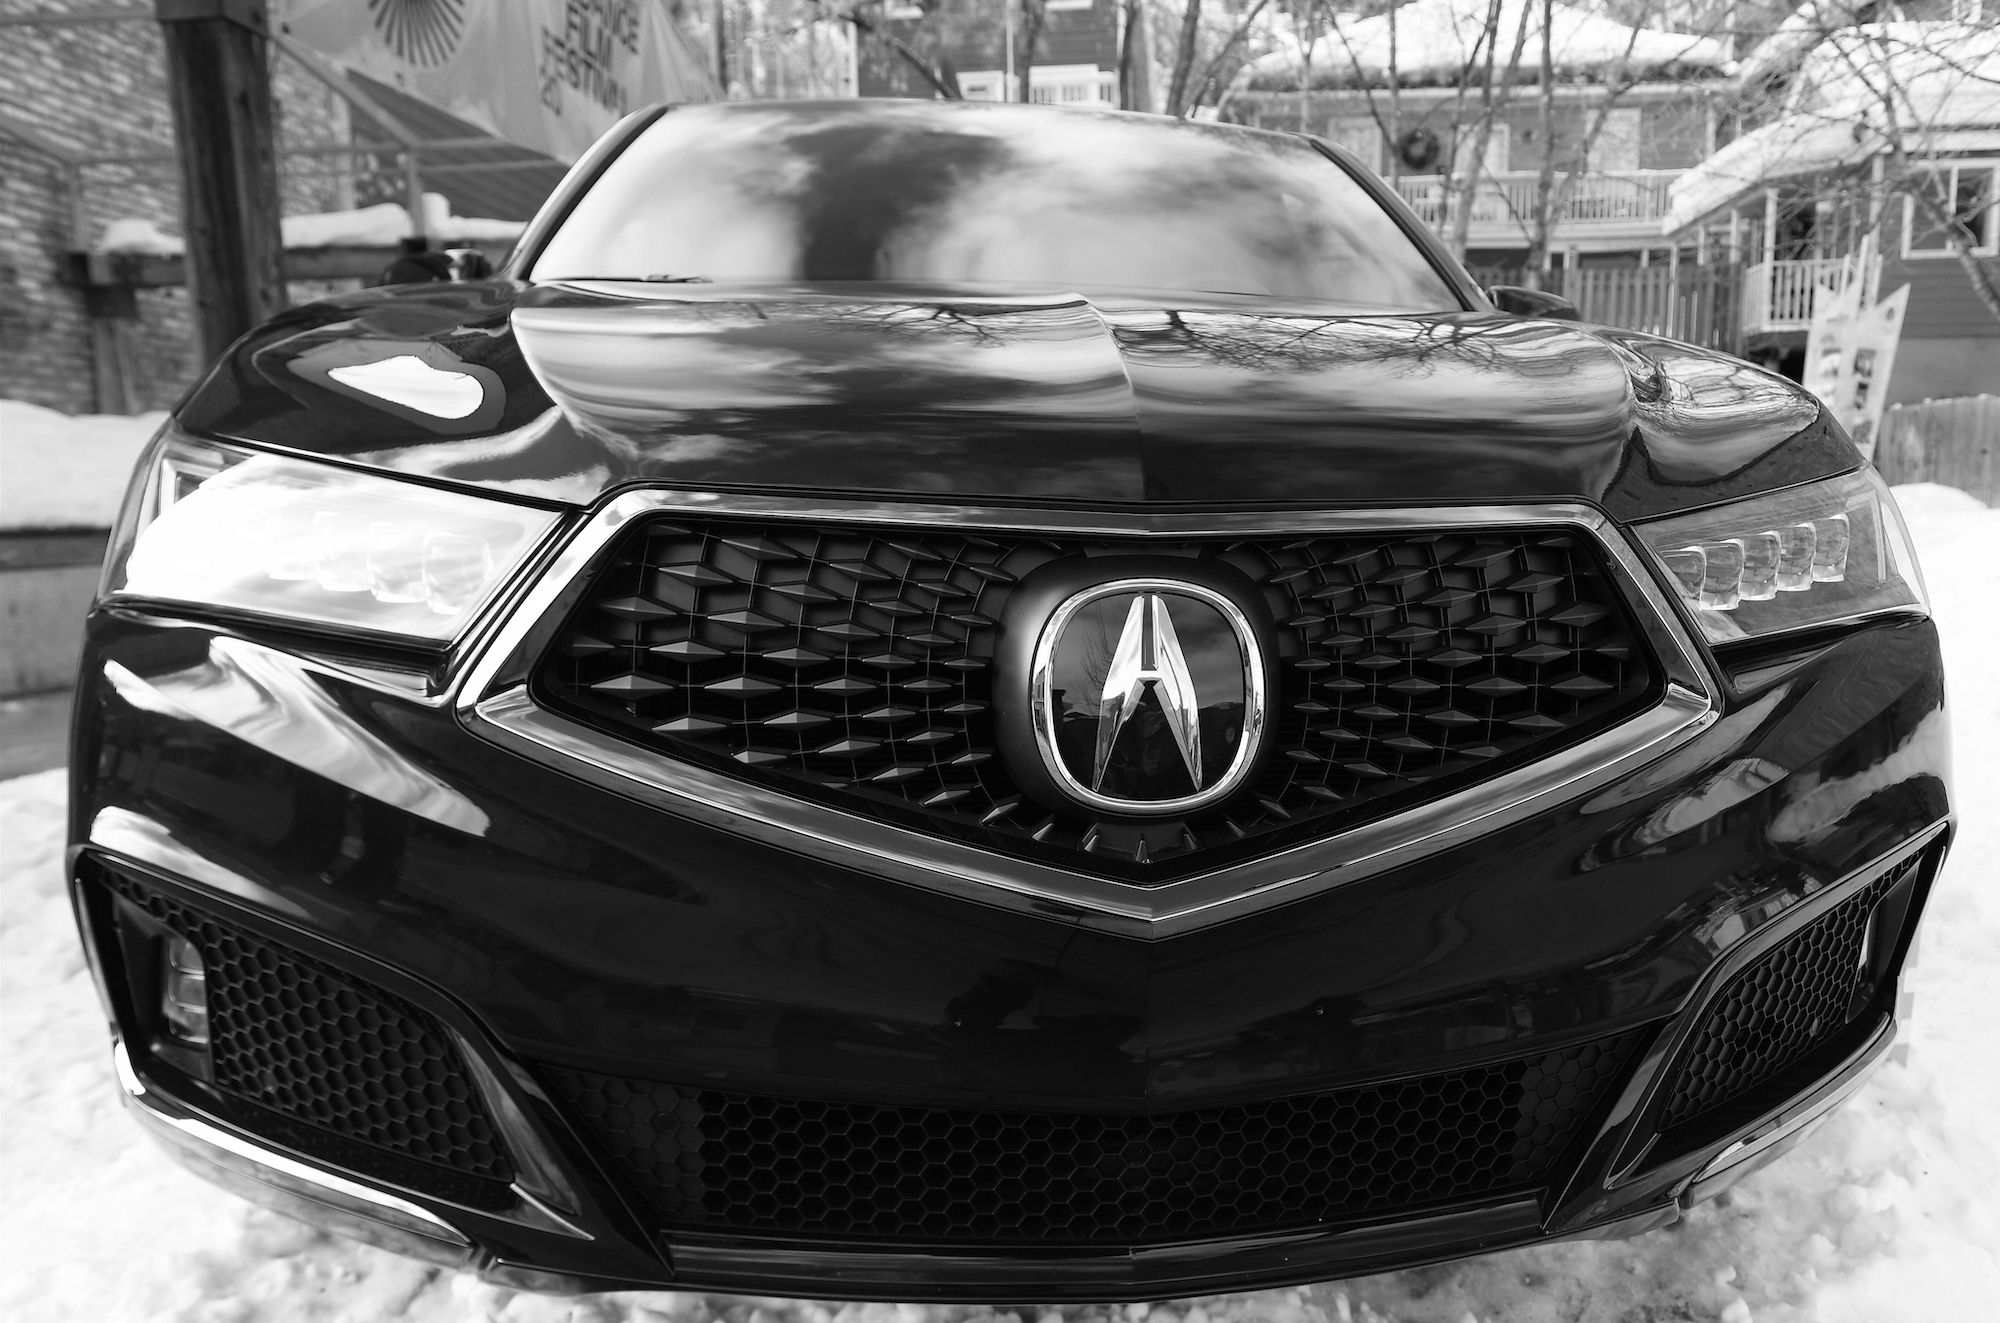 black and white image of a 2020 Acura MDX SUV